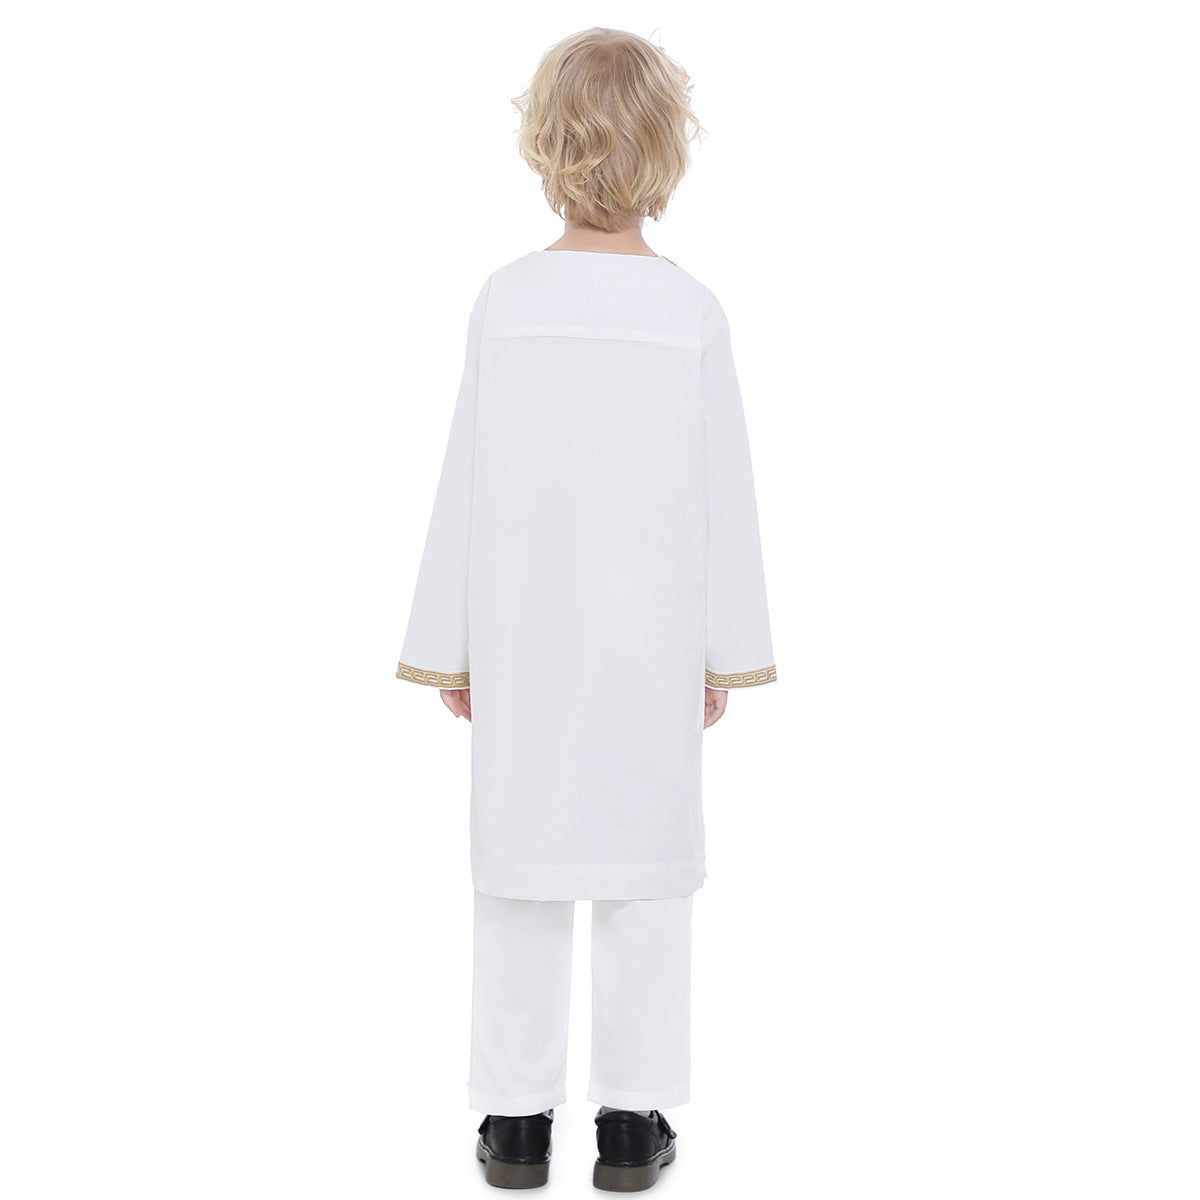 Middle East Teen Boy Embroidered Robe Suit - Merchantsy 